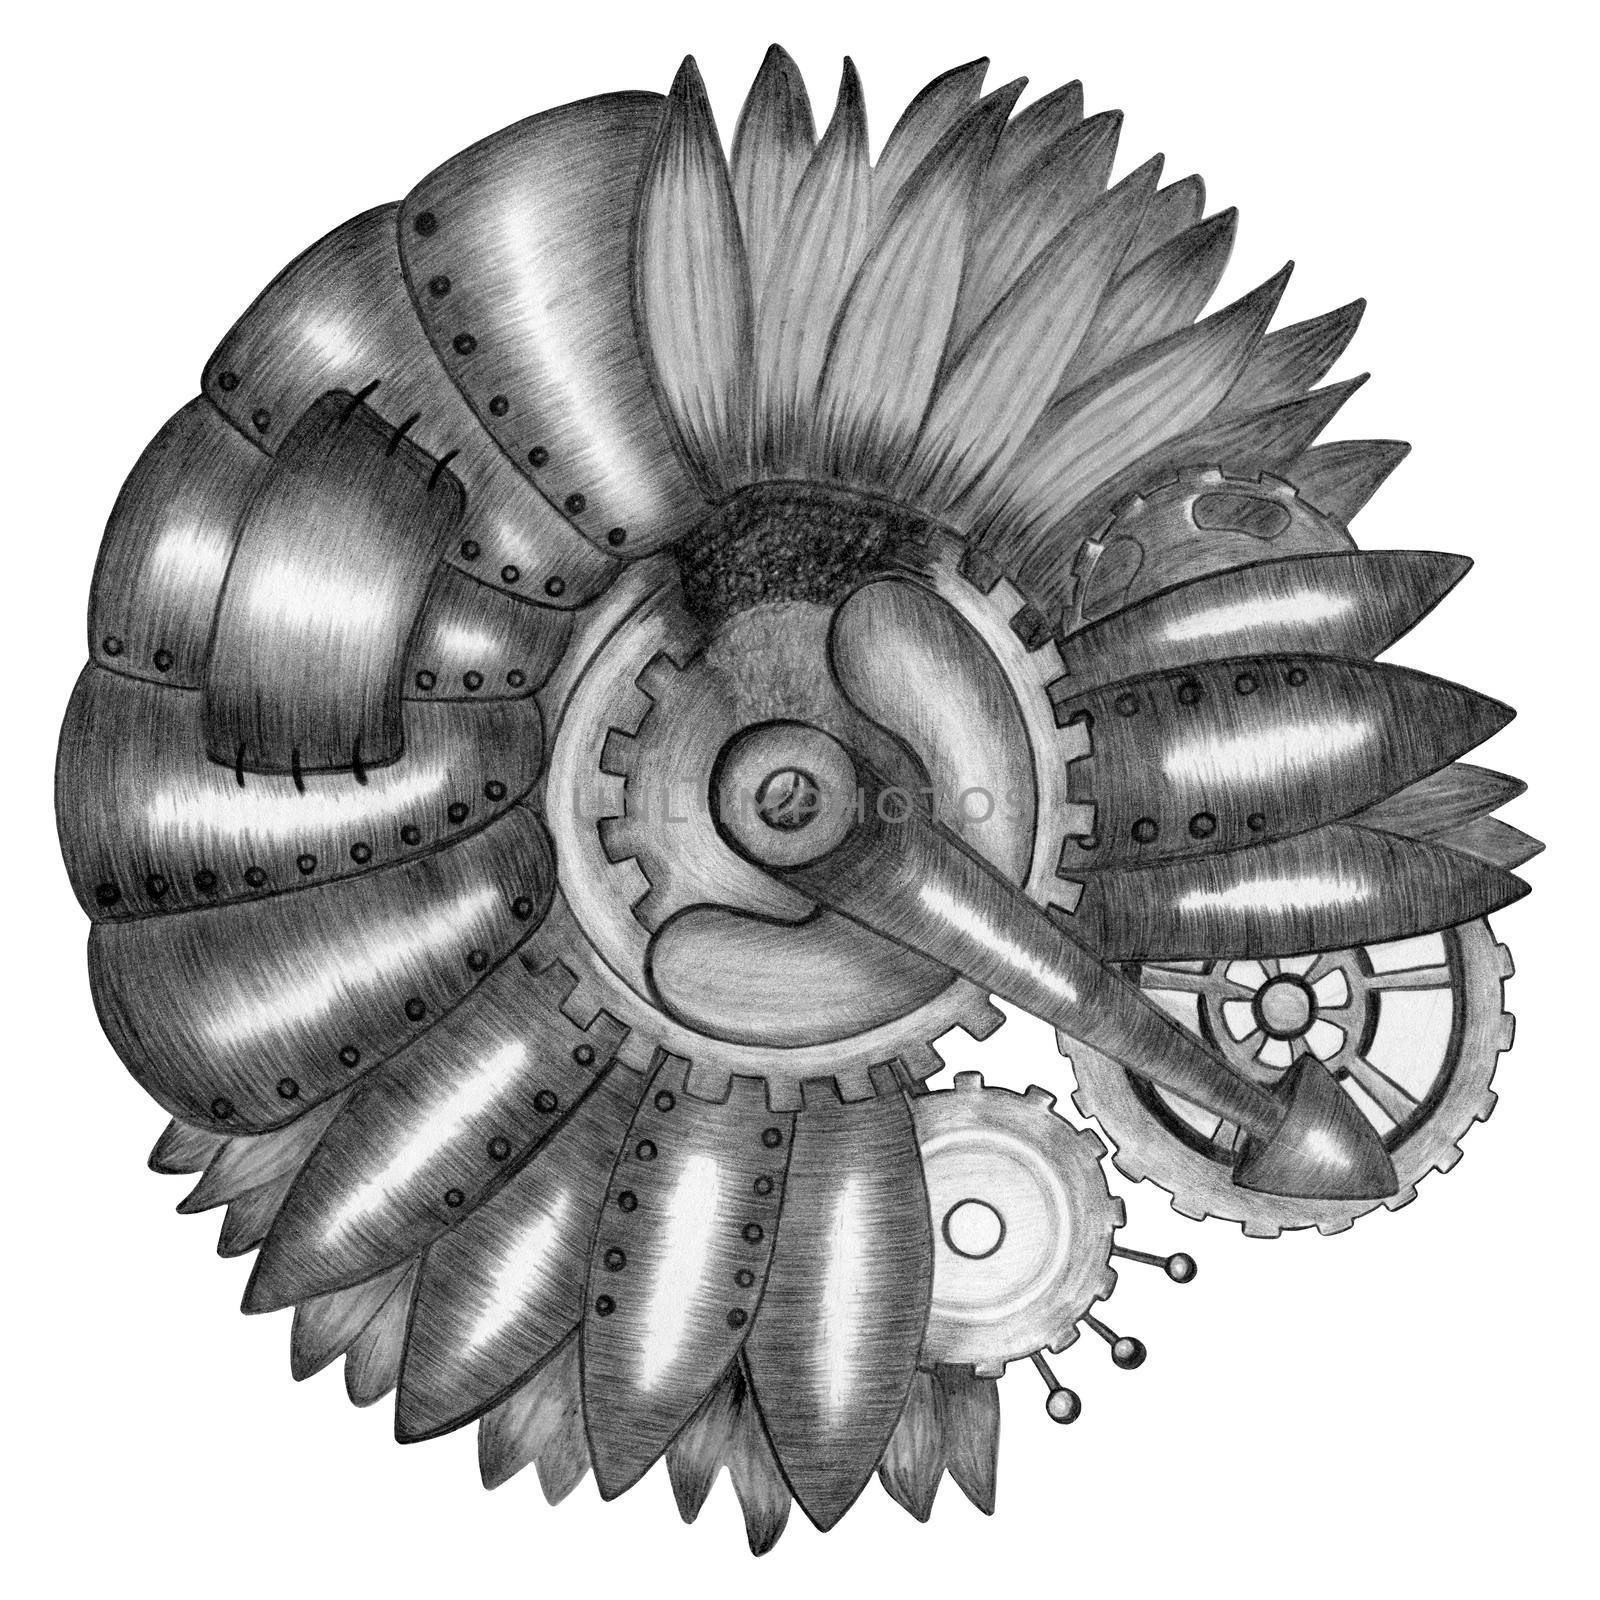 Design Element Hand Drawn Illustration of Black and White Steampunk Sunflower in Gray Colors on White Background. Steampunk Sunflower Drawn by Pencil.